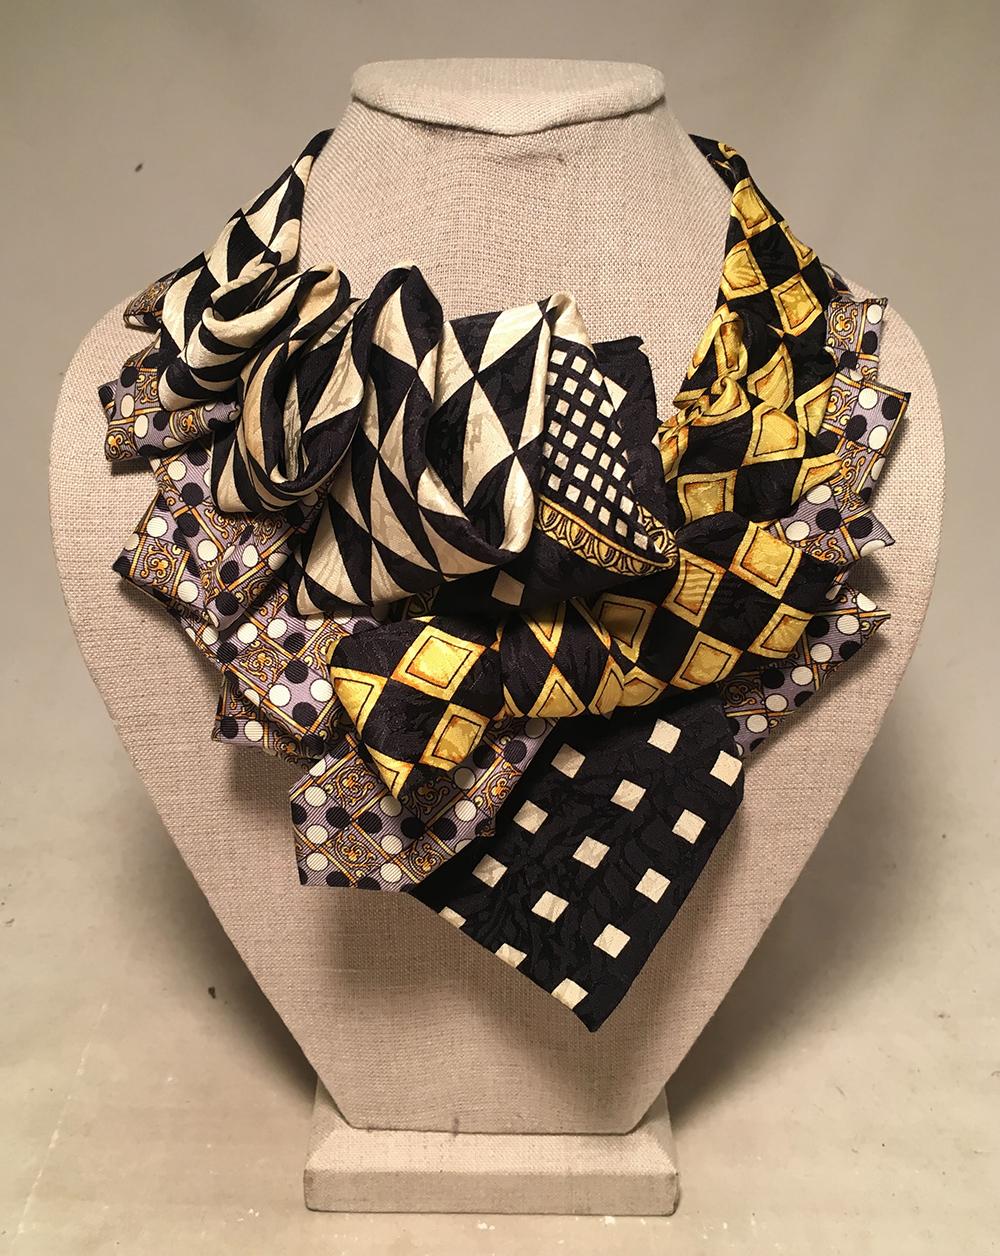 Vintage Versace Black and Yellow silk ties artistically arranged into a gorgeous ascot necklace. Versace black and white print checkered silk tie, Versace black and yellow diamond print vintage tie, and versace checkered checkered print tie with